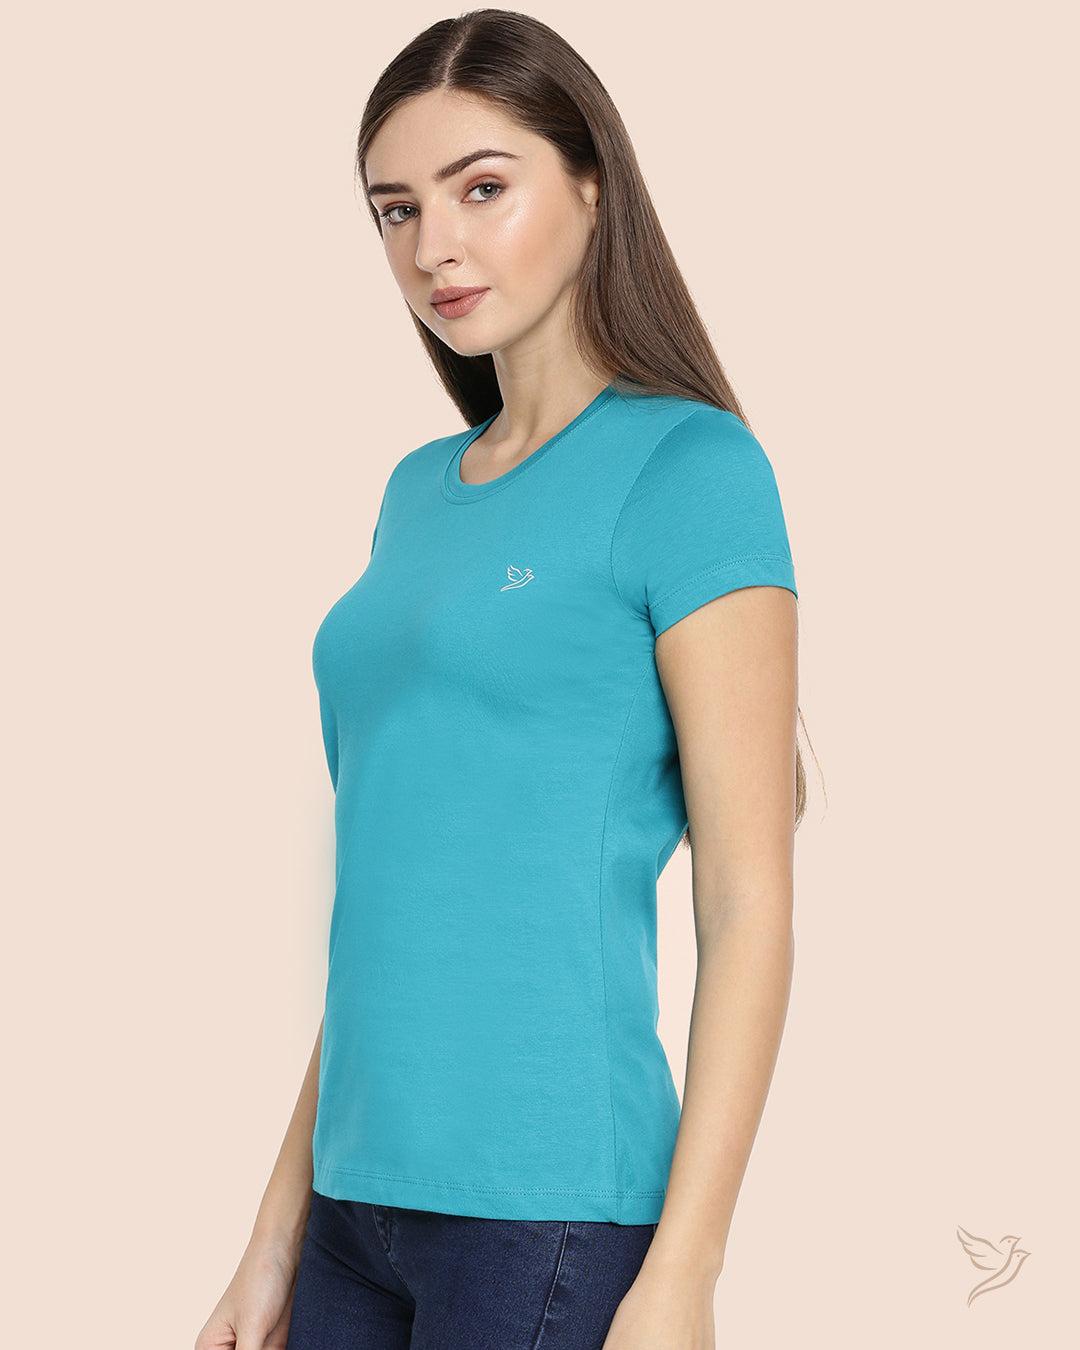 Pool Side Slim Fit Signature Tee for Women